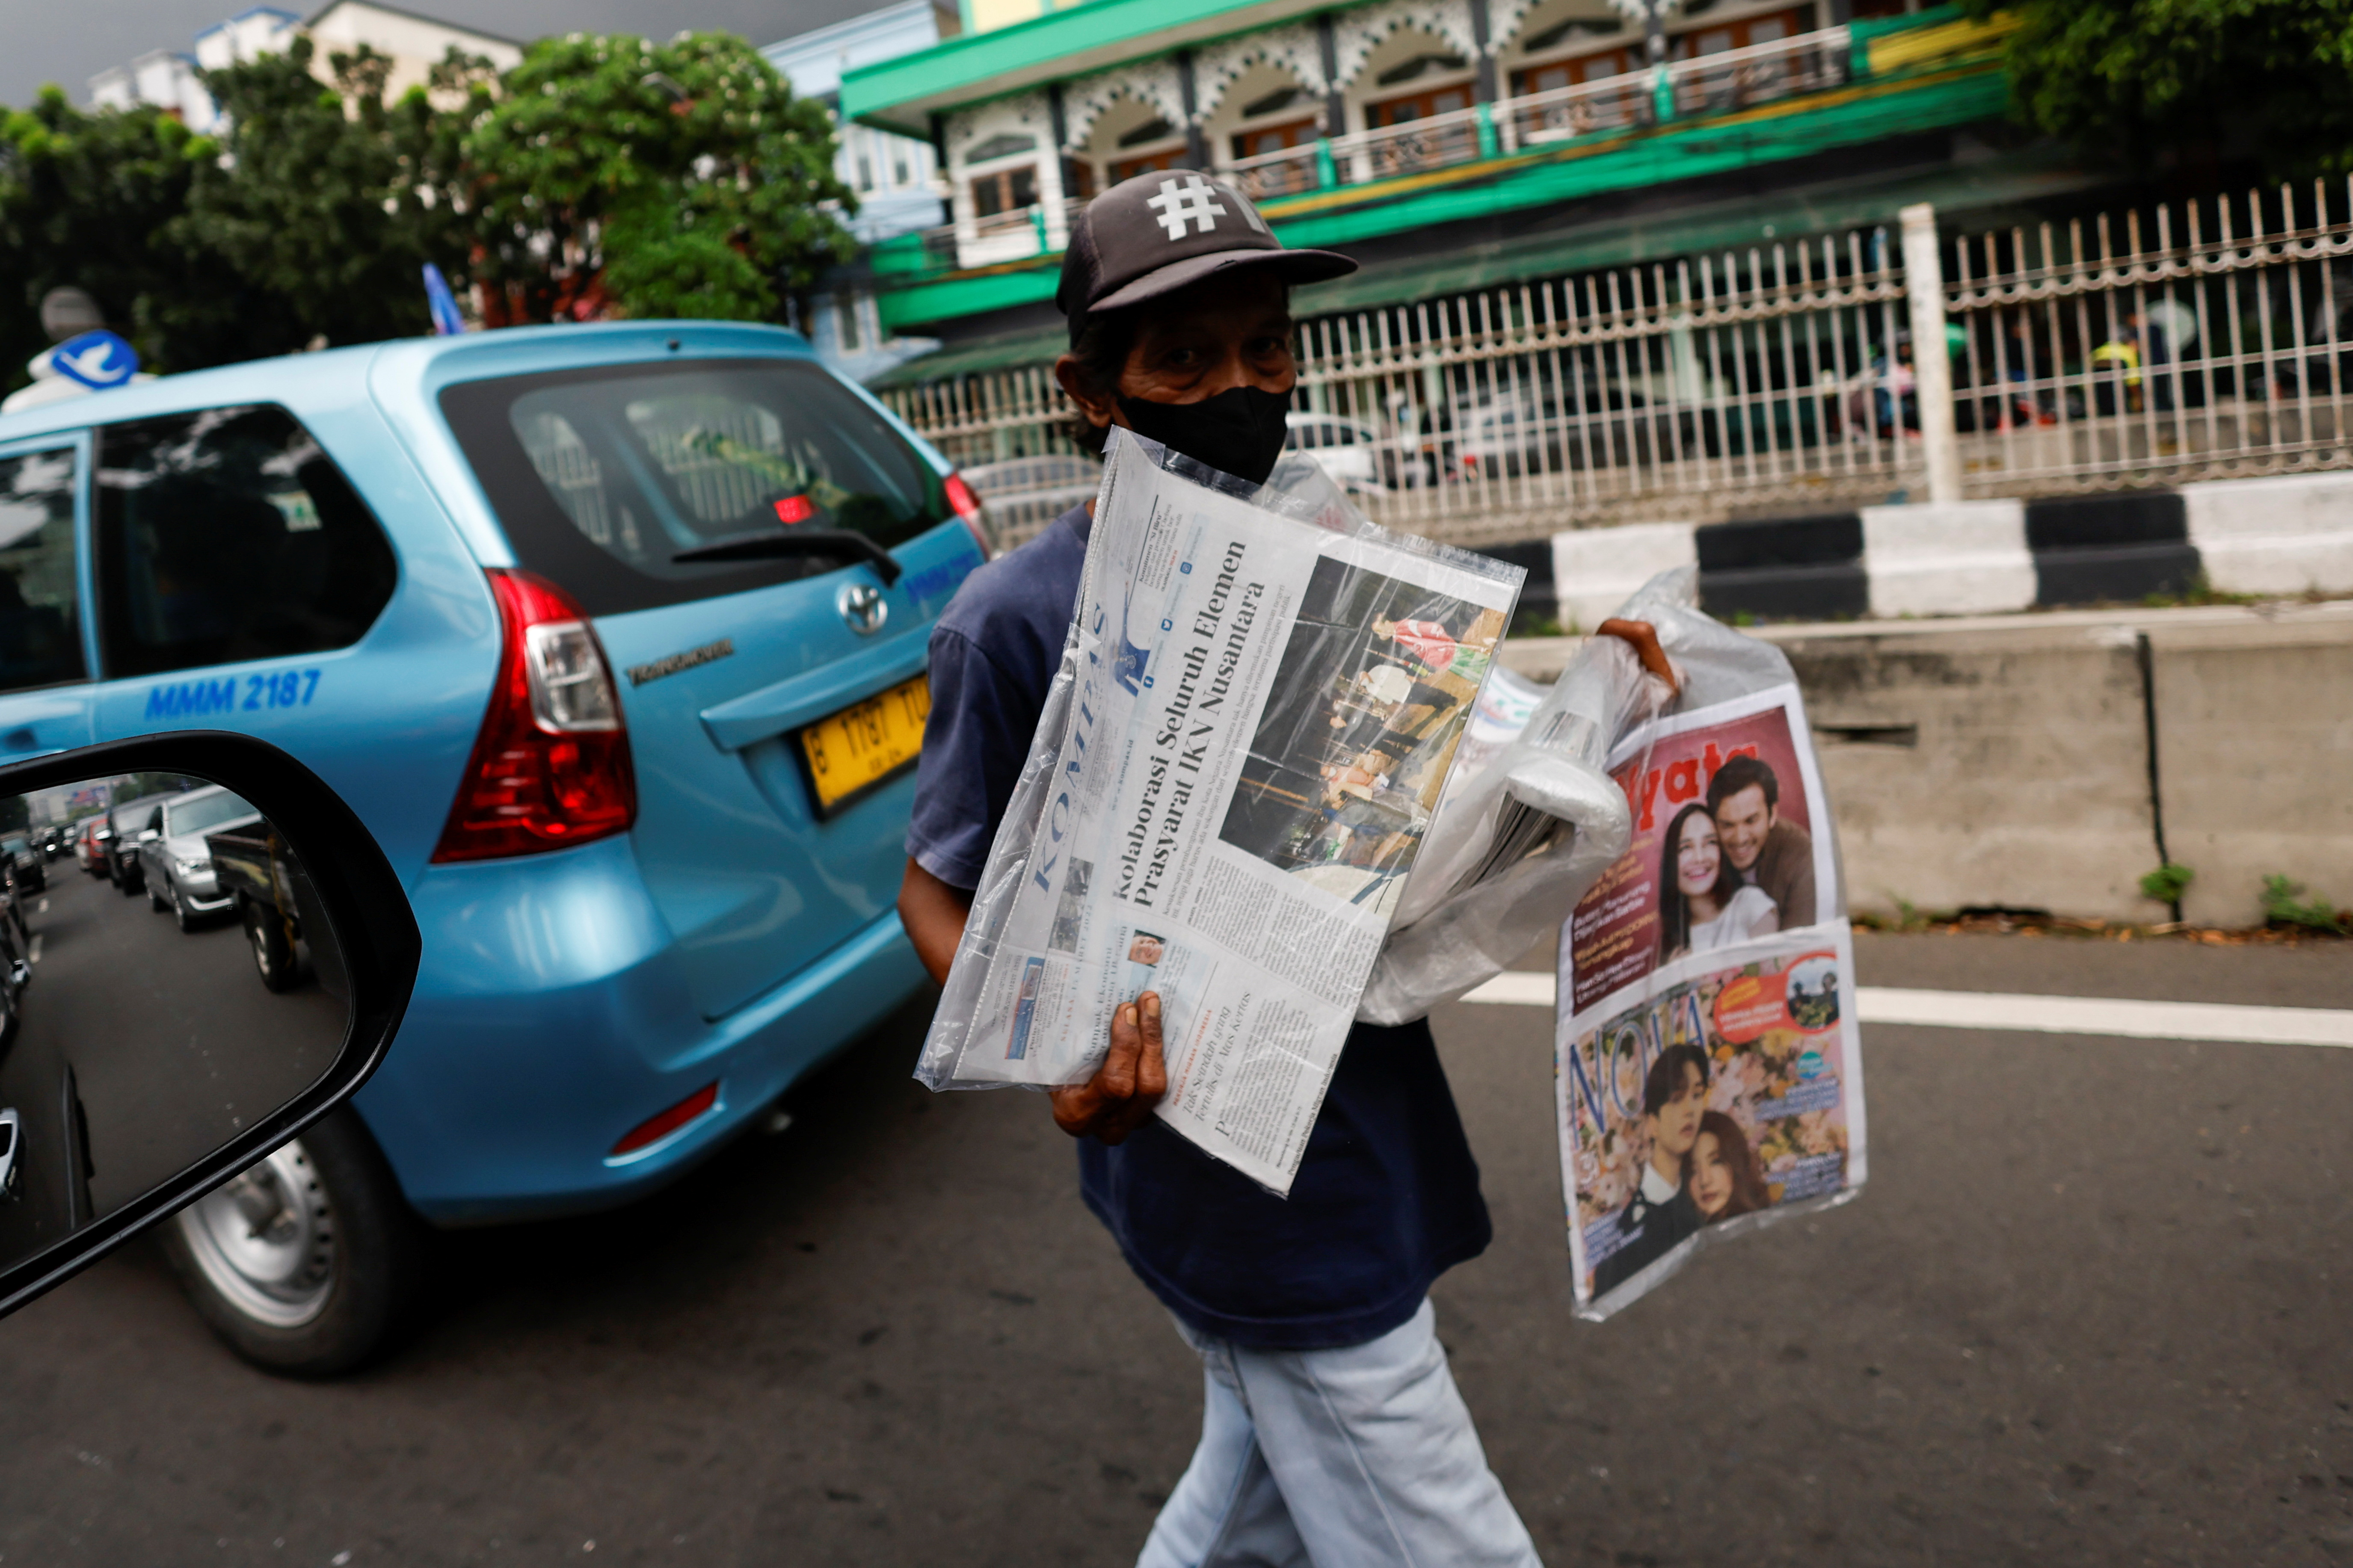 A street vendor sells papers with the news of Indonesian New Capital Nusantara (IKN) on its headline, during a traffic in Jakarta